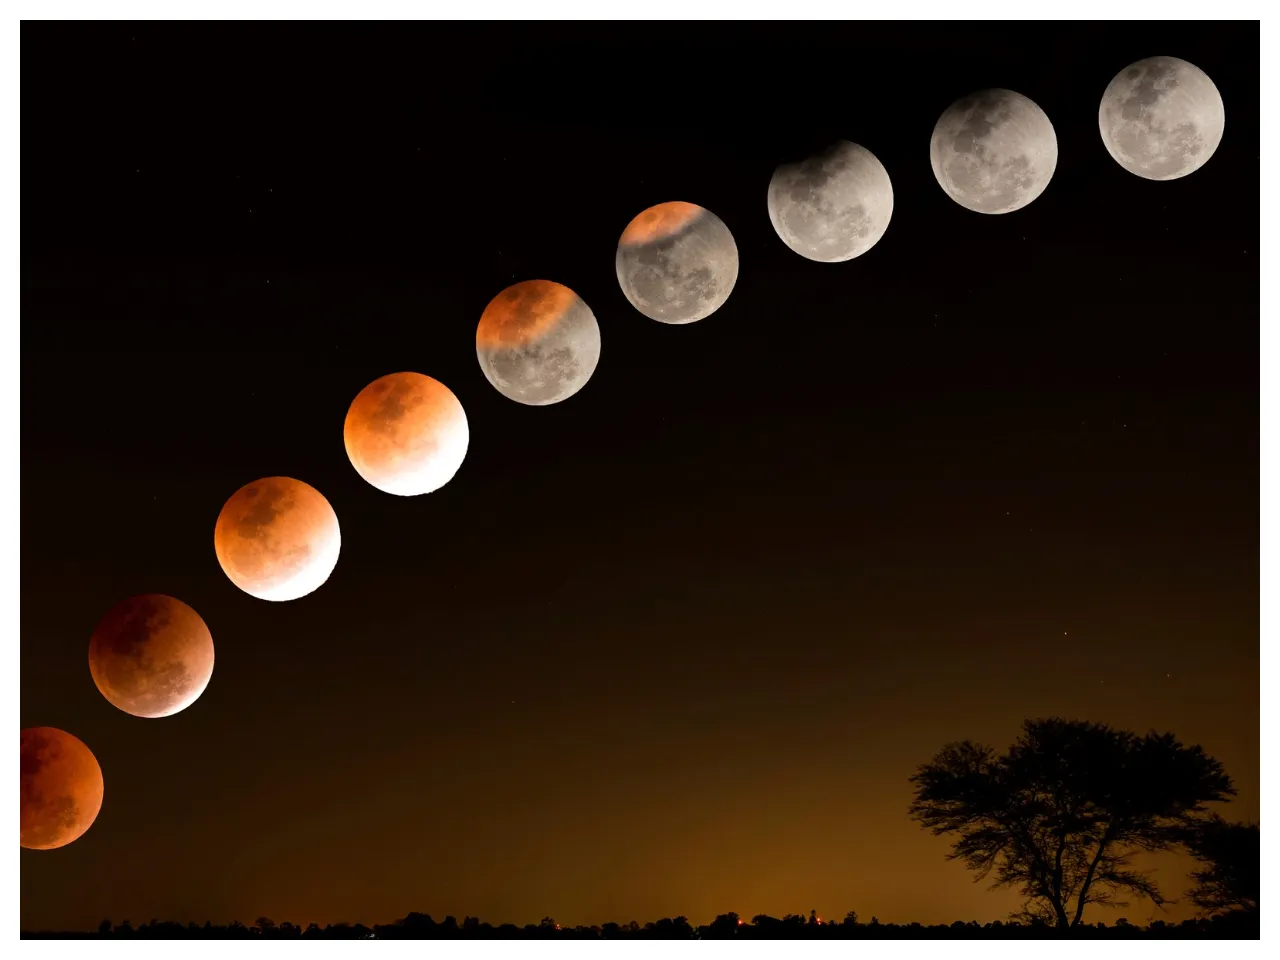 Like a lunar eclipse! You'll be surprised to know